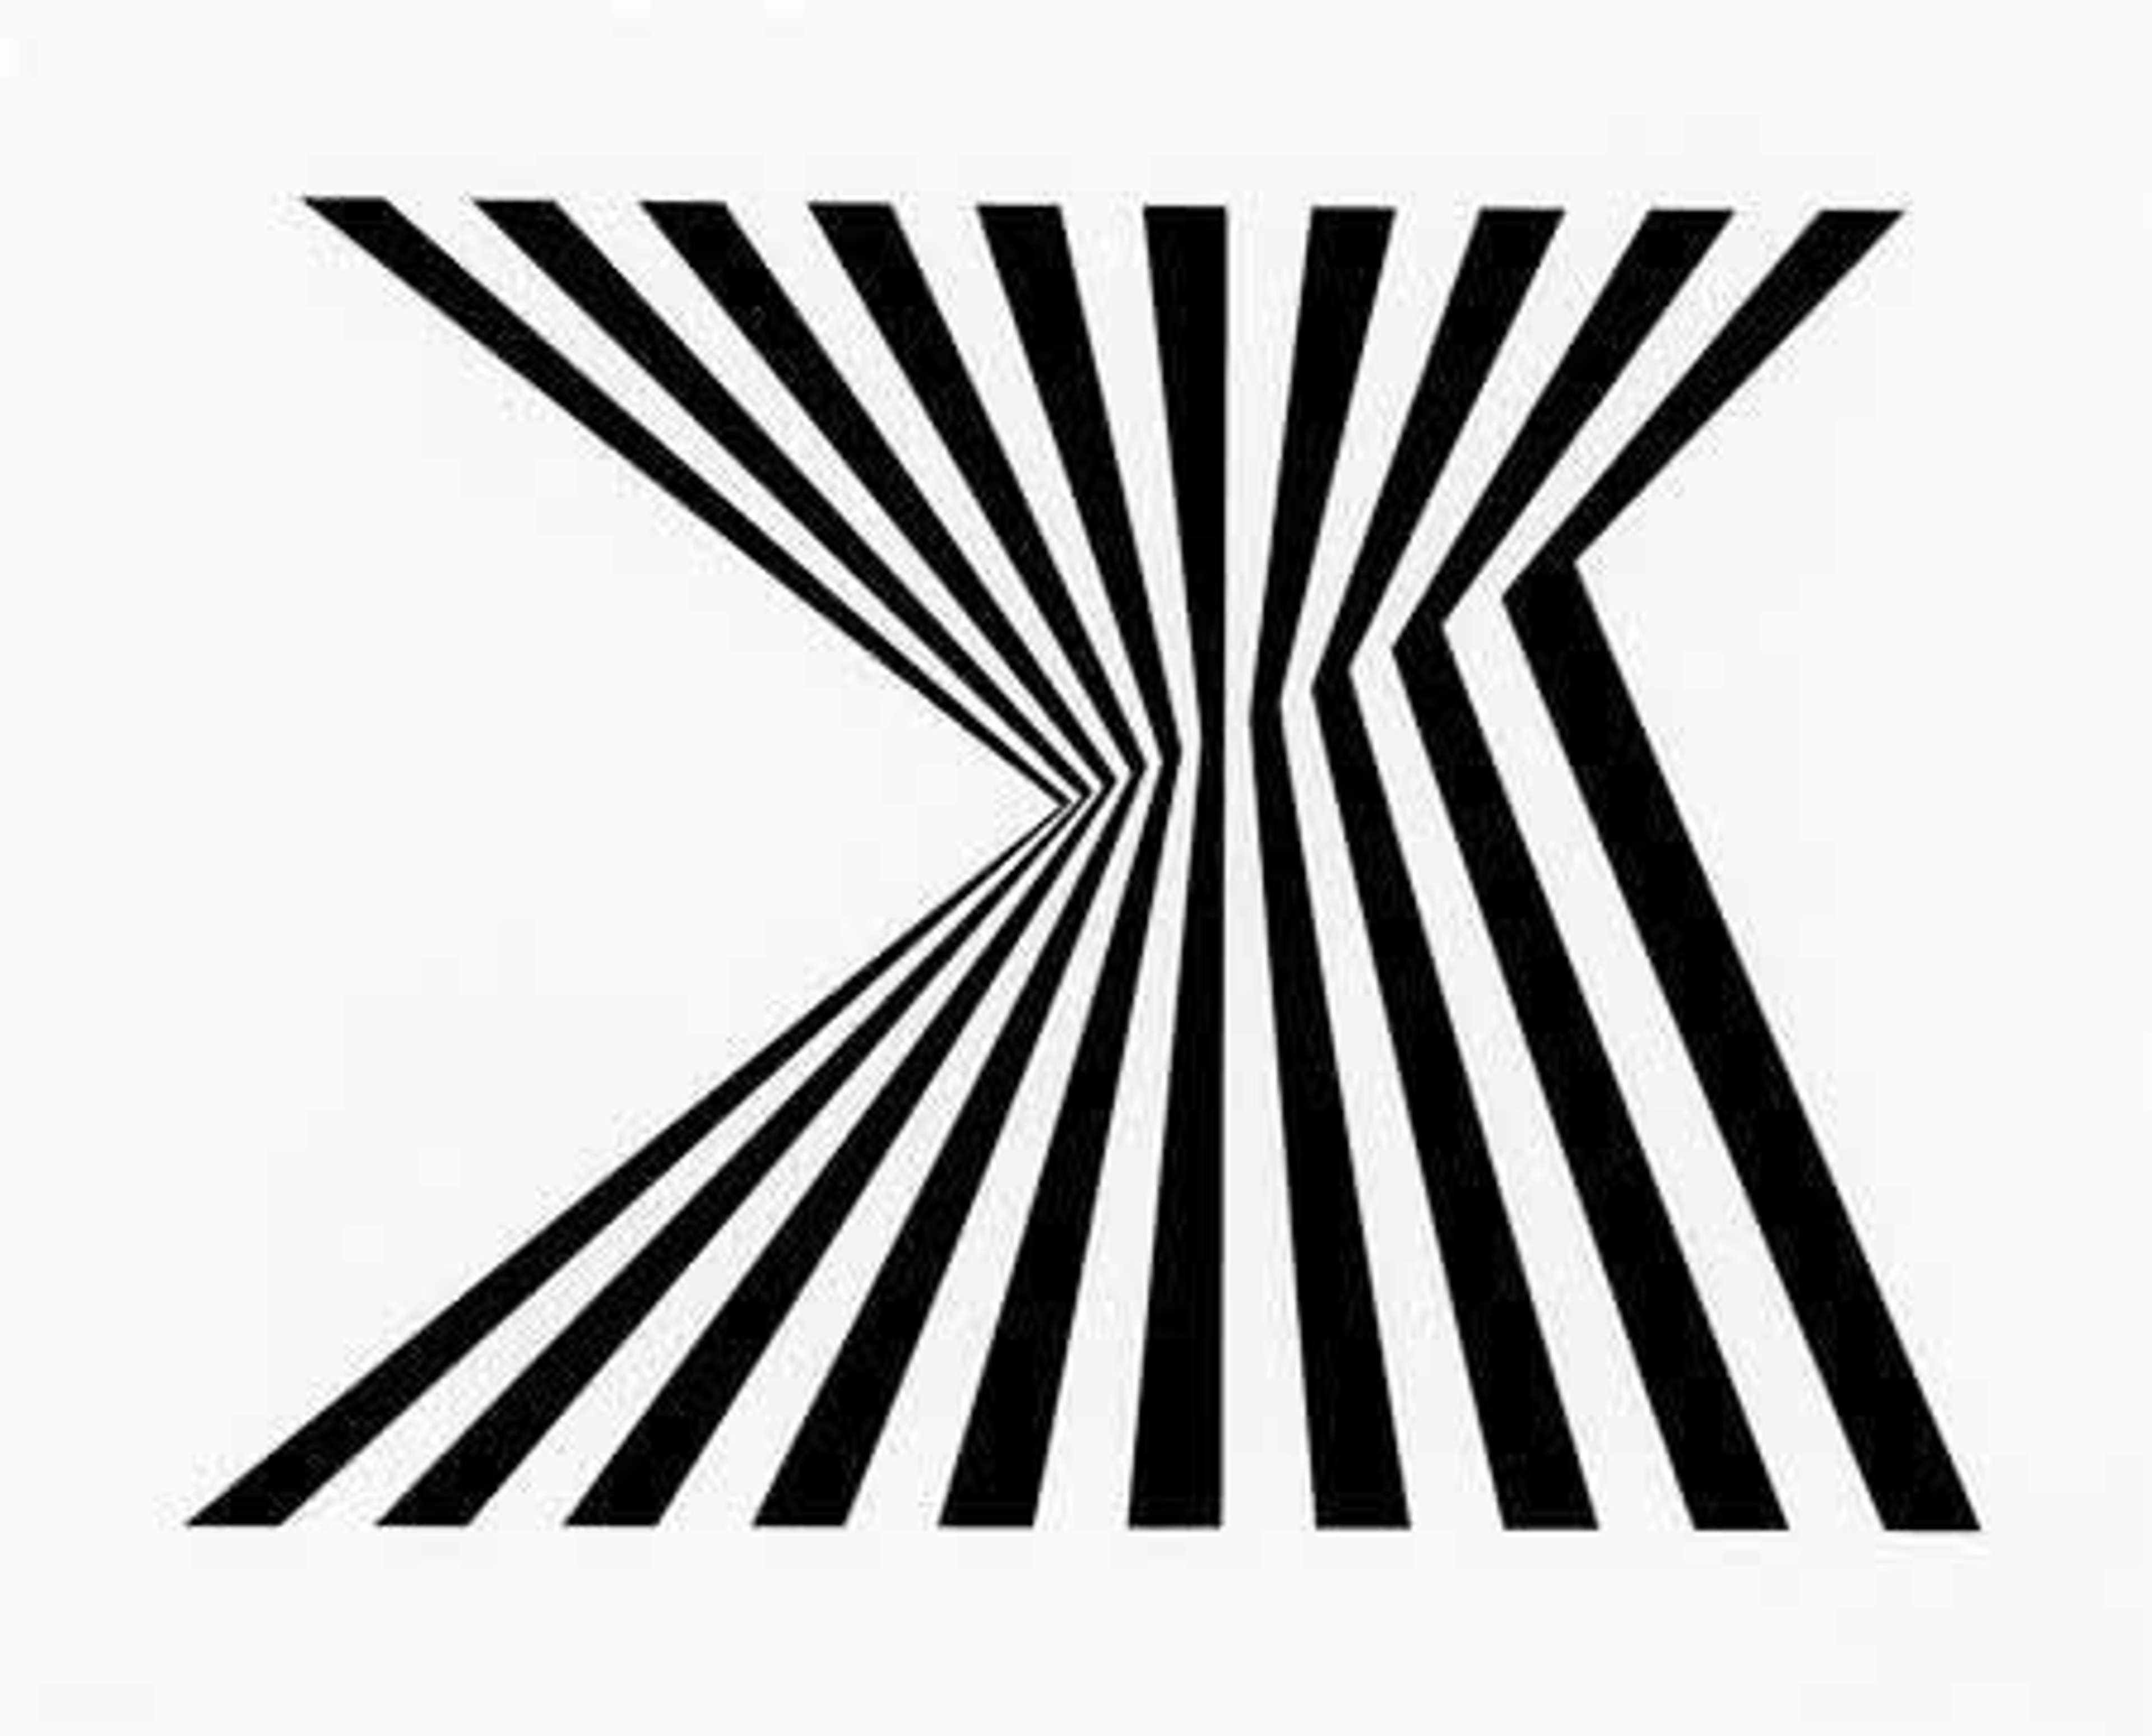 Vertical black lines with indentions of white space, depicting an optical illusion.